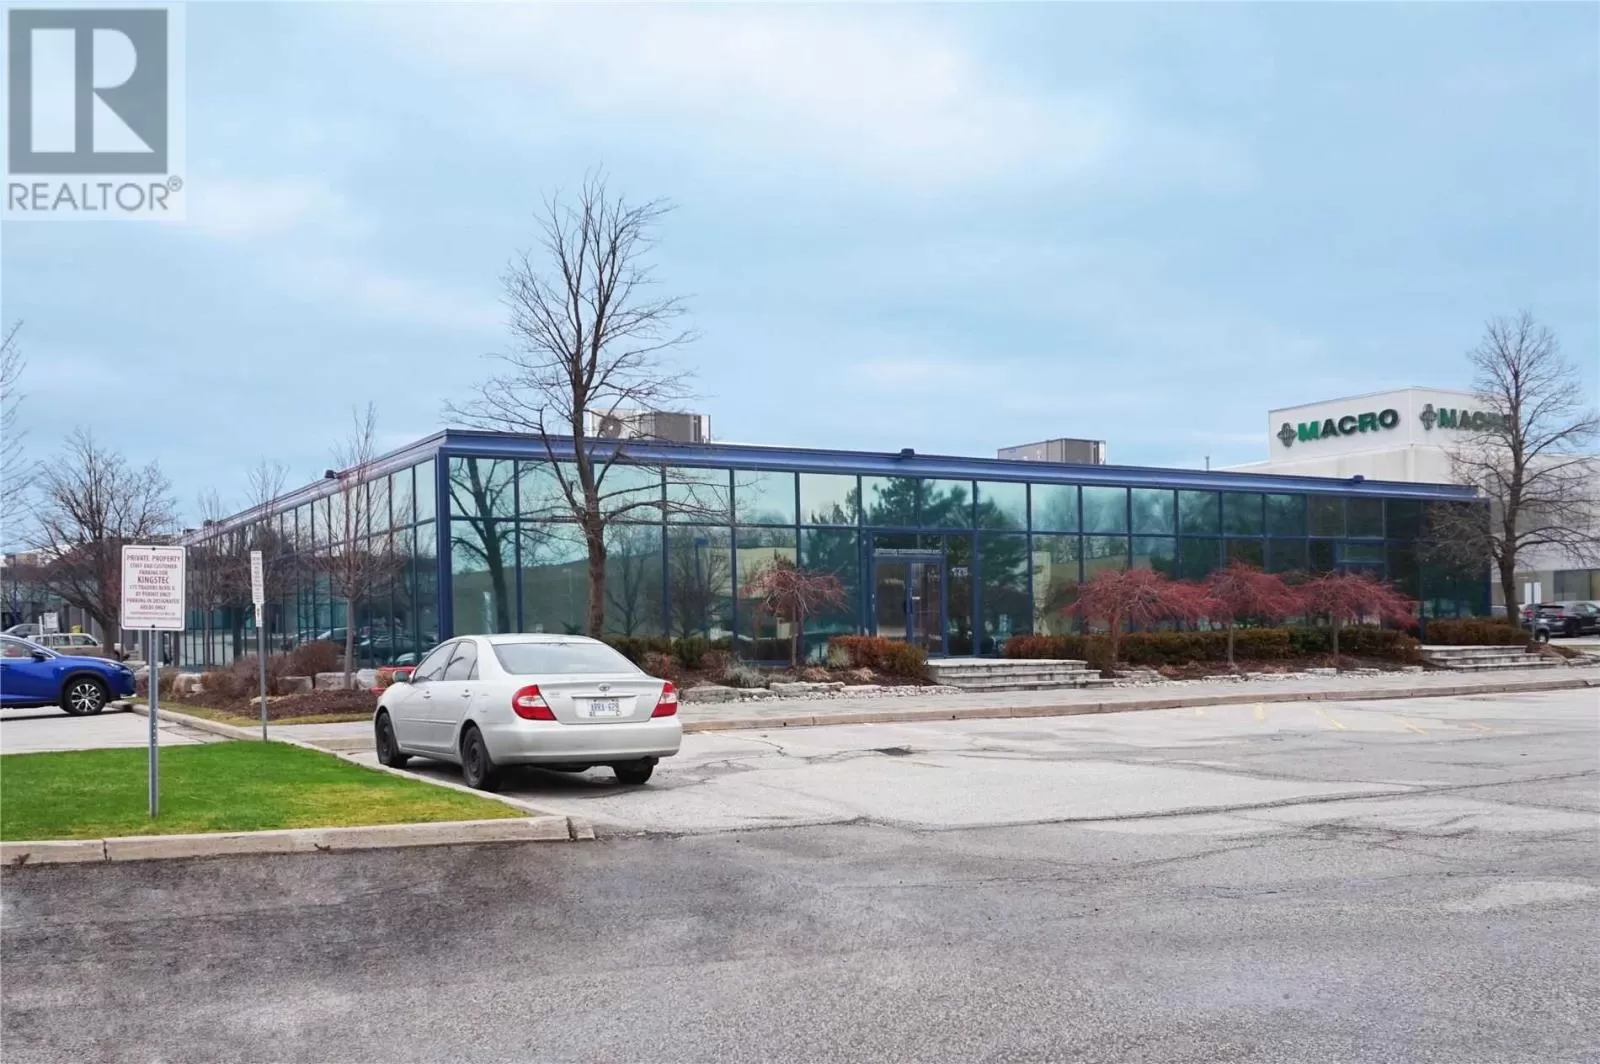 Offices for rent: 100-200 - 175 Traders Boulevard, Mississauga, Ontario L4Z 3S8